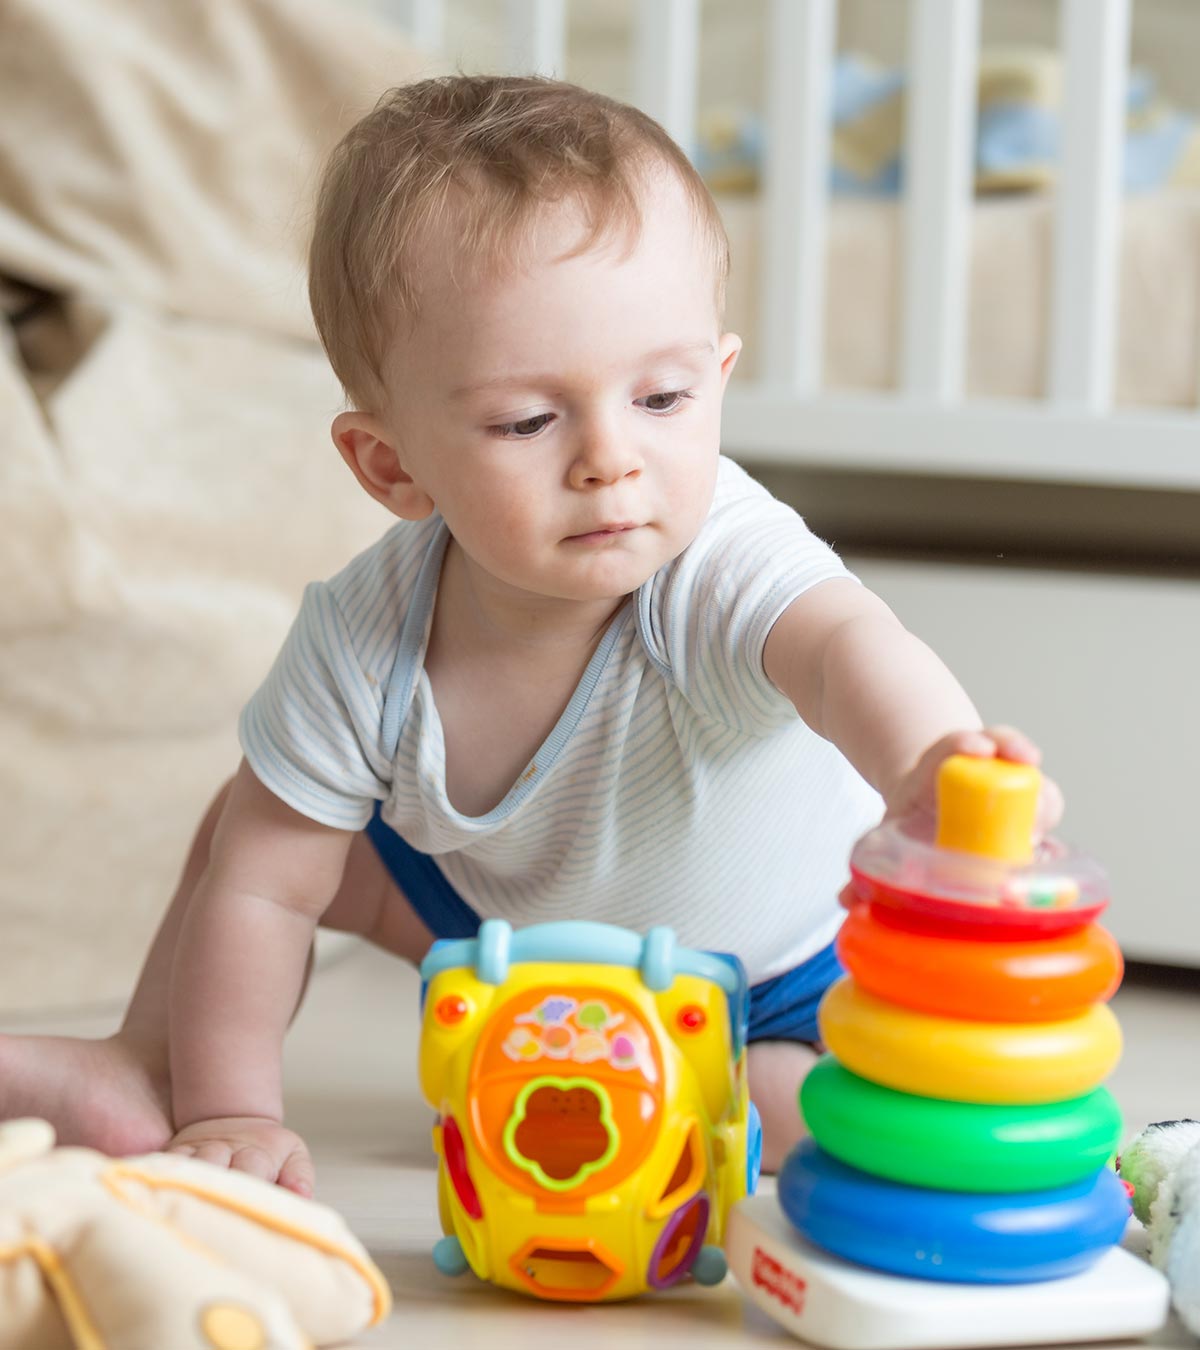 32 Best Toys And Gifts For 10 Month Old Babies To Buy In 2019